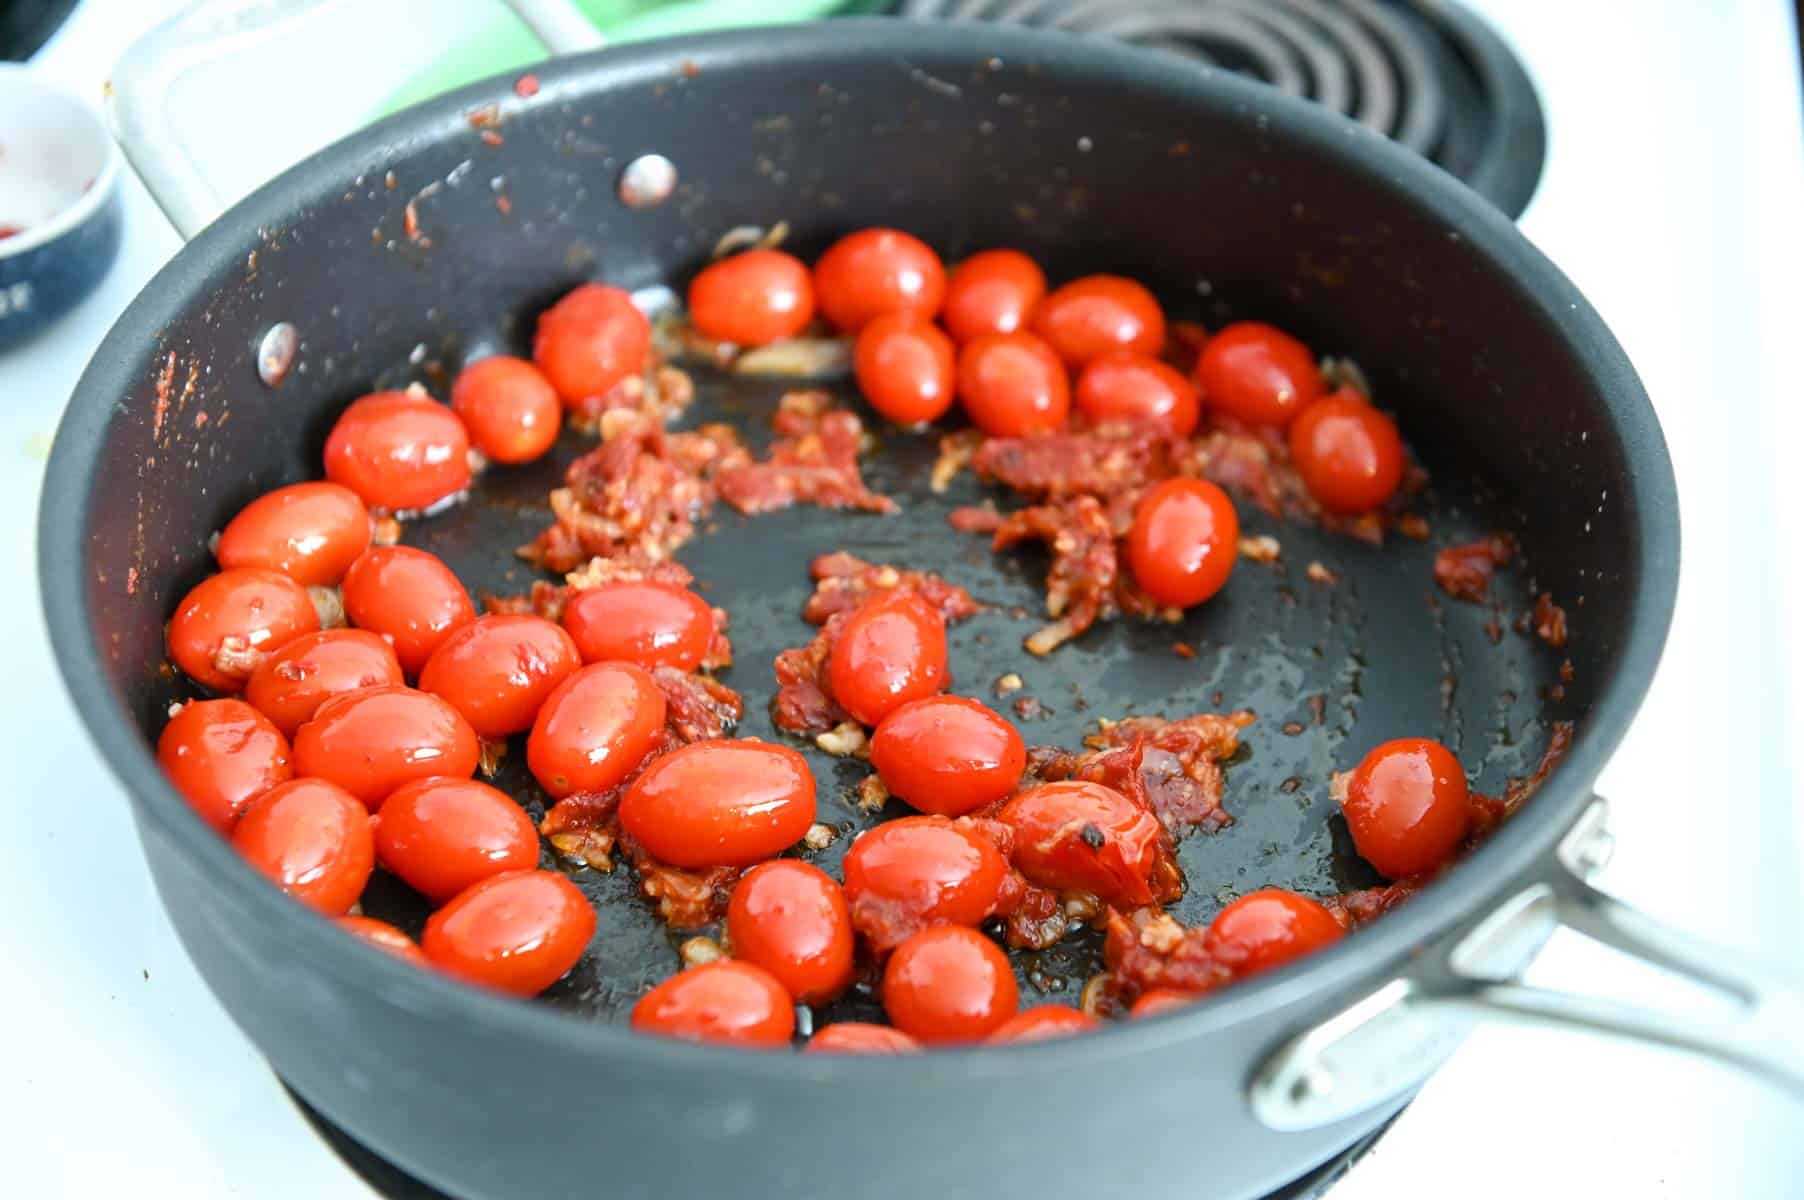 Cherry tomatoes cooking in a skillet.